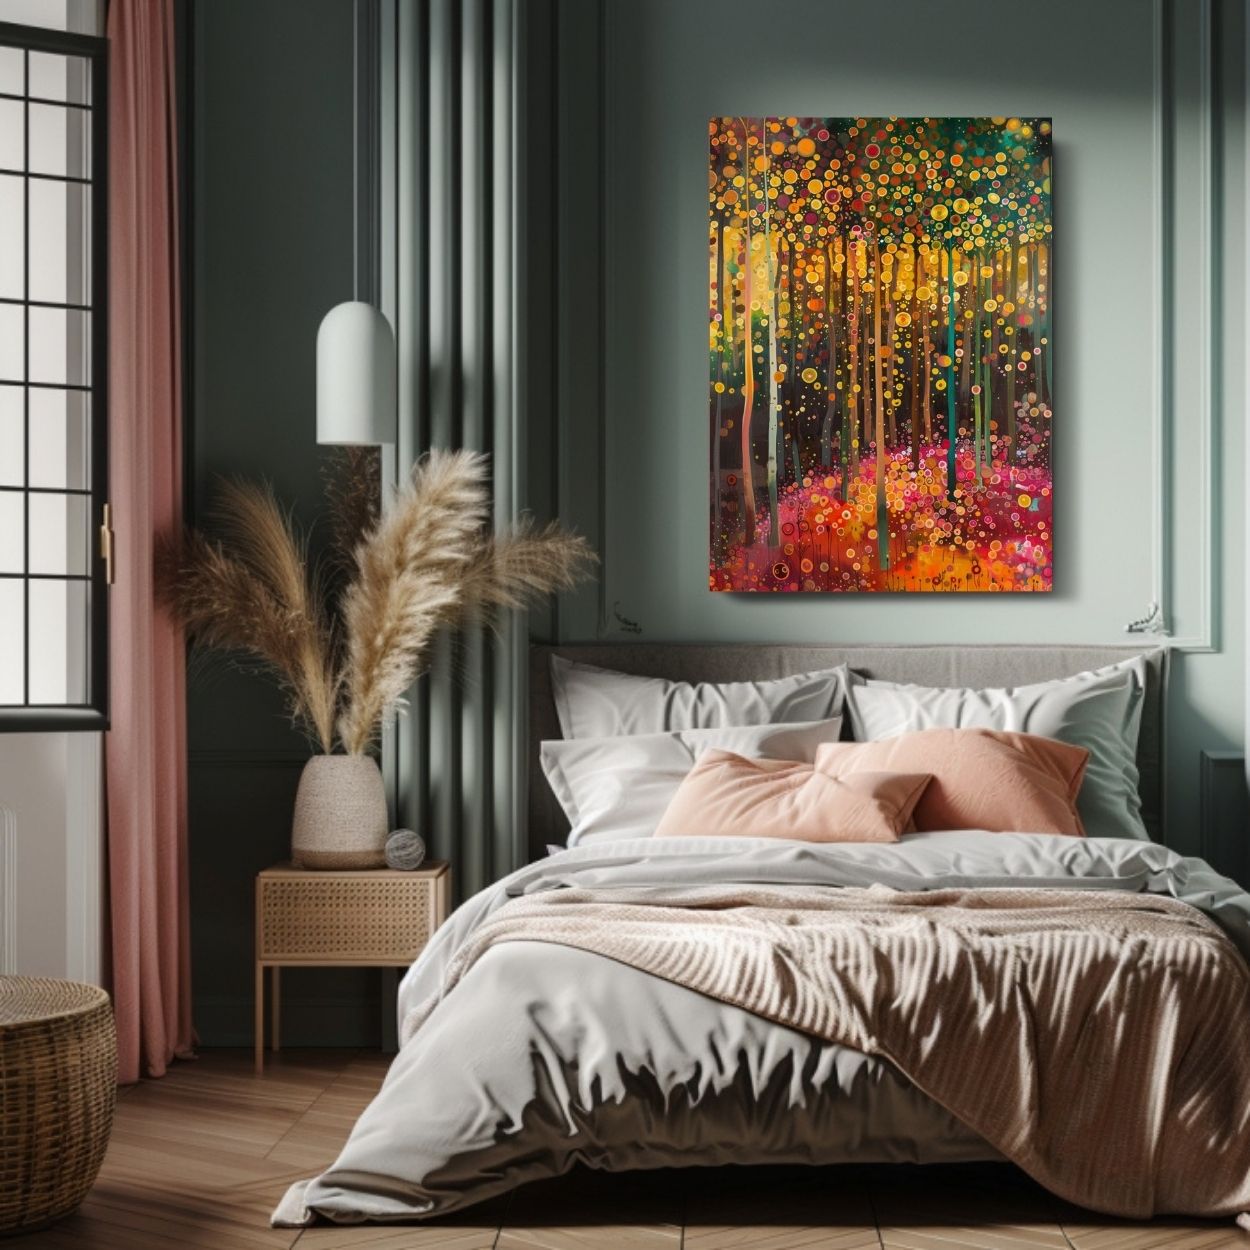 Product image showing canvas wall art of Glowing Grove - Summertime Forest and Sunbeams in a bedroom